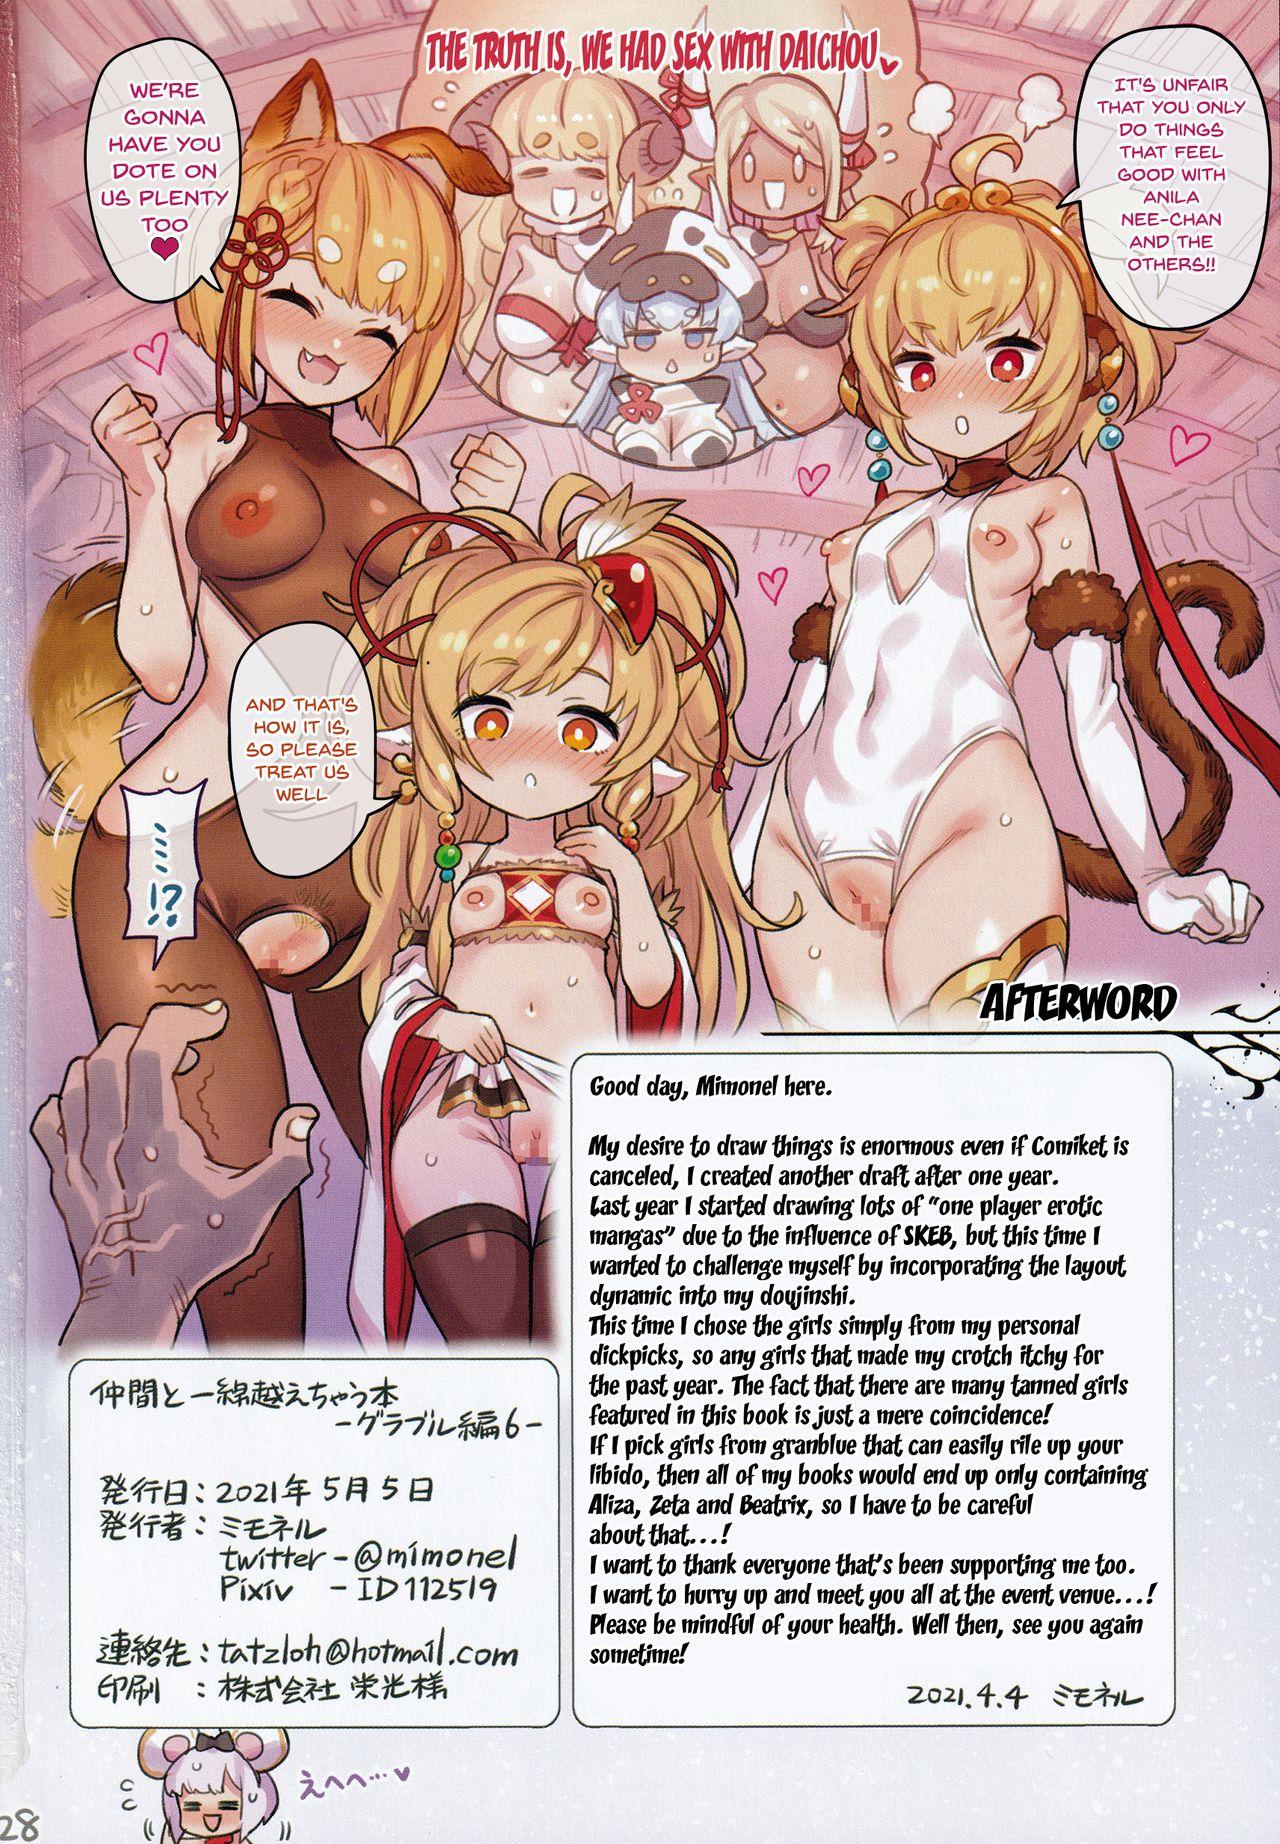 Sissy (AC3) [Mimoneland (Mimonel)] Nakama to Issen Koechau Hon -Grablu Hen 6- | A Book About Crossing The Line With Your Friends ~GranBlue Book 6~ (Granblue Fantasy) [English] {Doujins.com} - Granblue fantasy Wives - Page 26